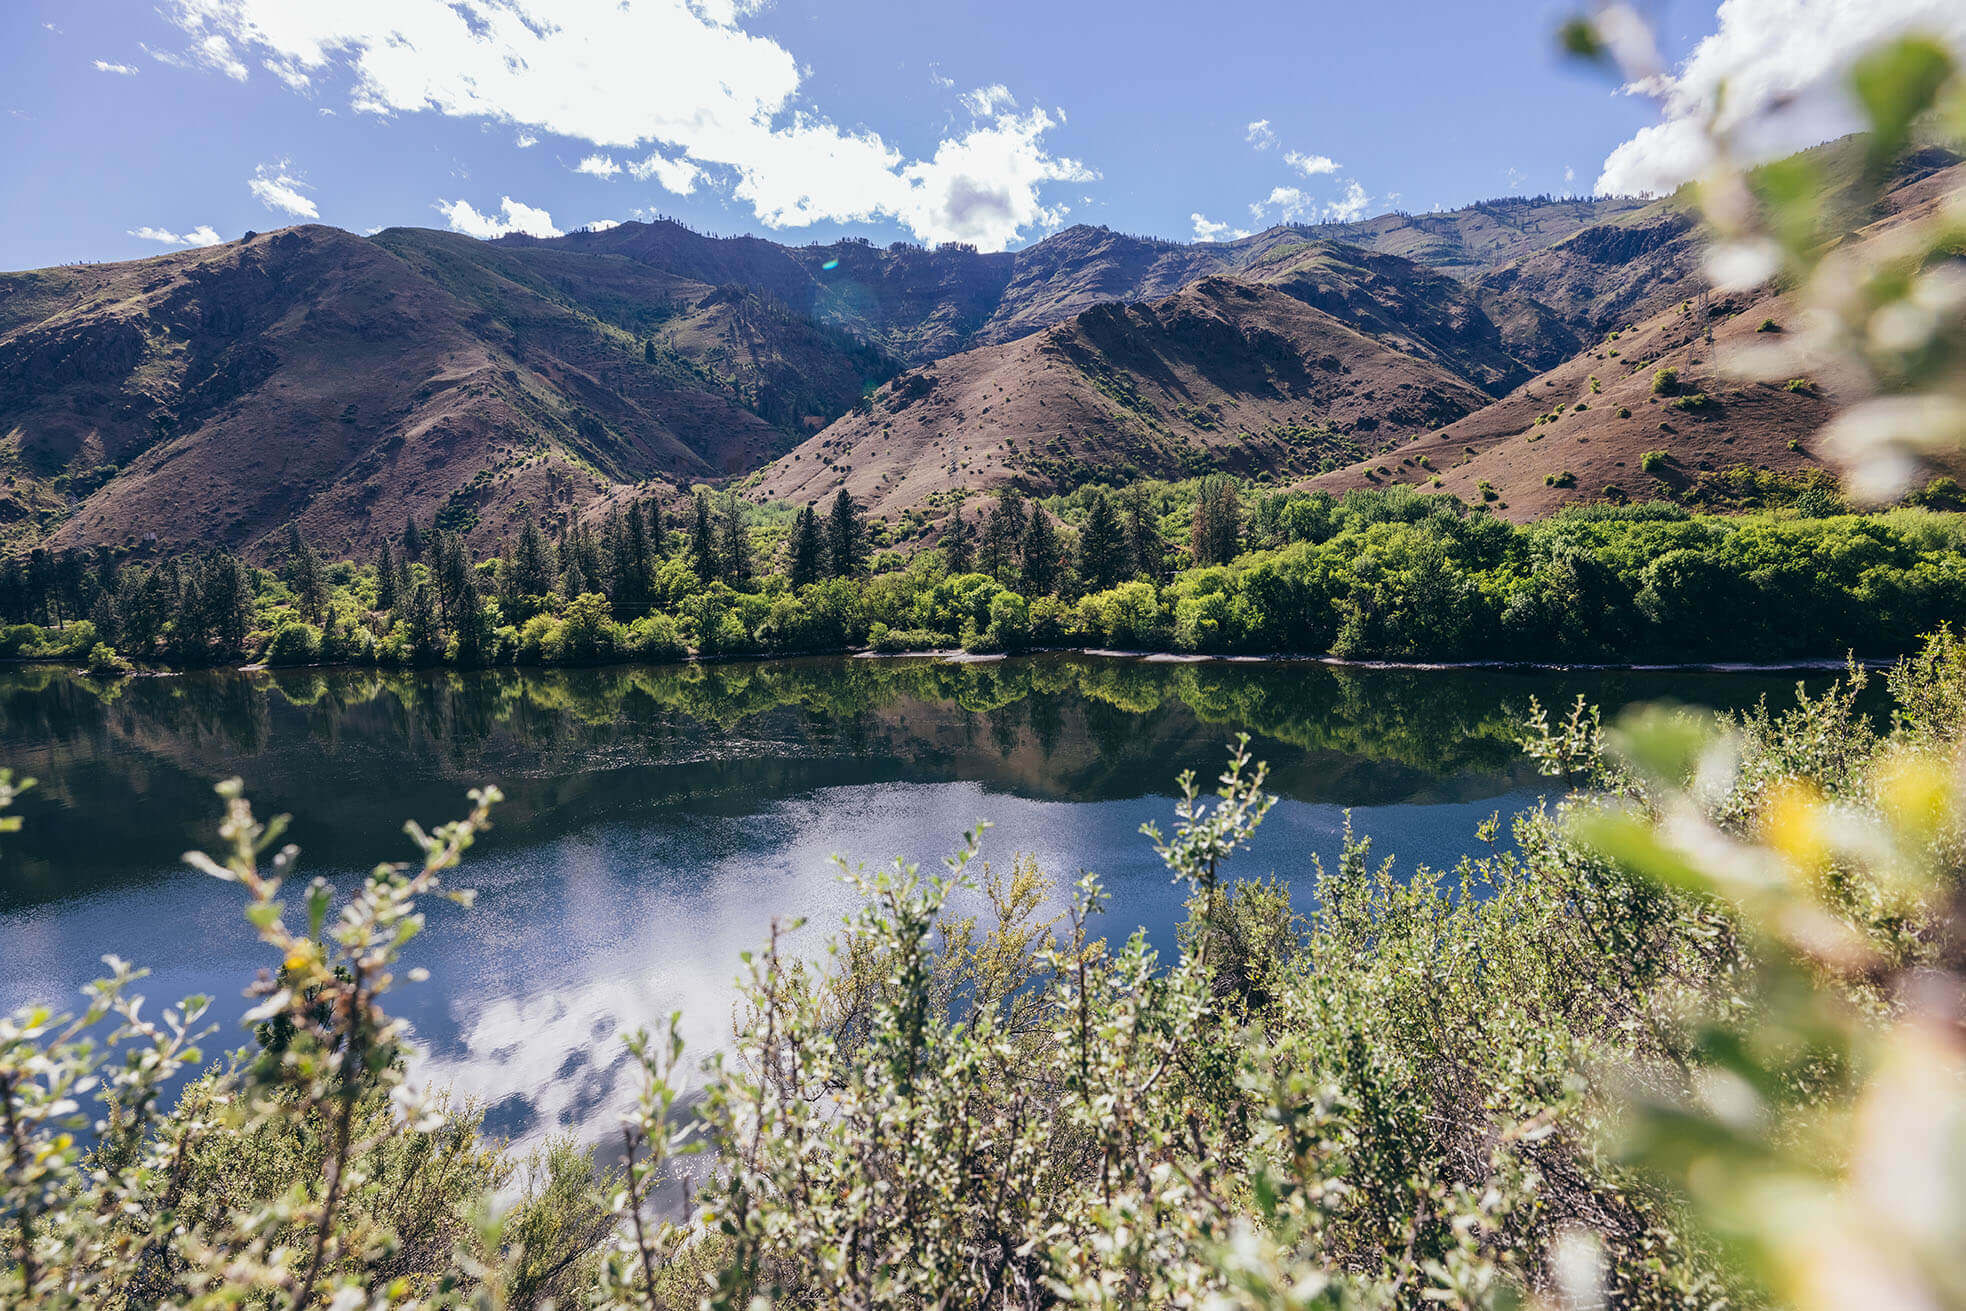 A view of the Big Bar Camping Area on the Snake River surrounded by trees and Hells Canyon.